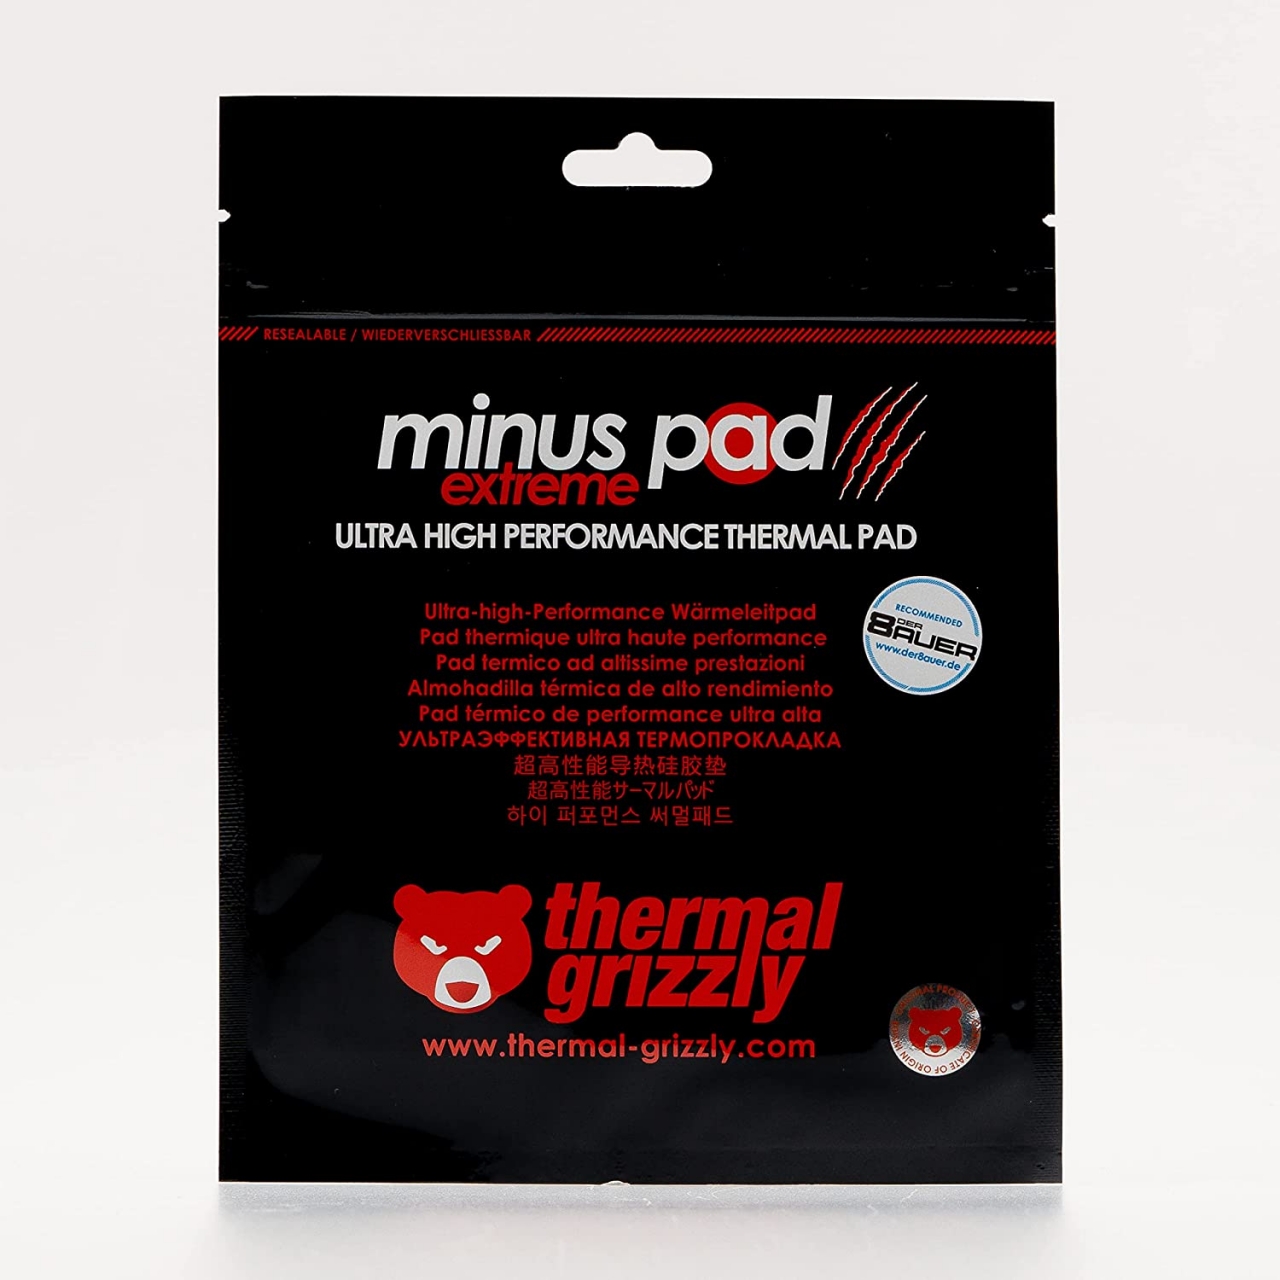 Thermal Grizzly Minus Termal Pad Extreme 100x100x0.5mm